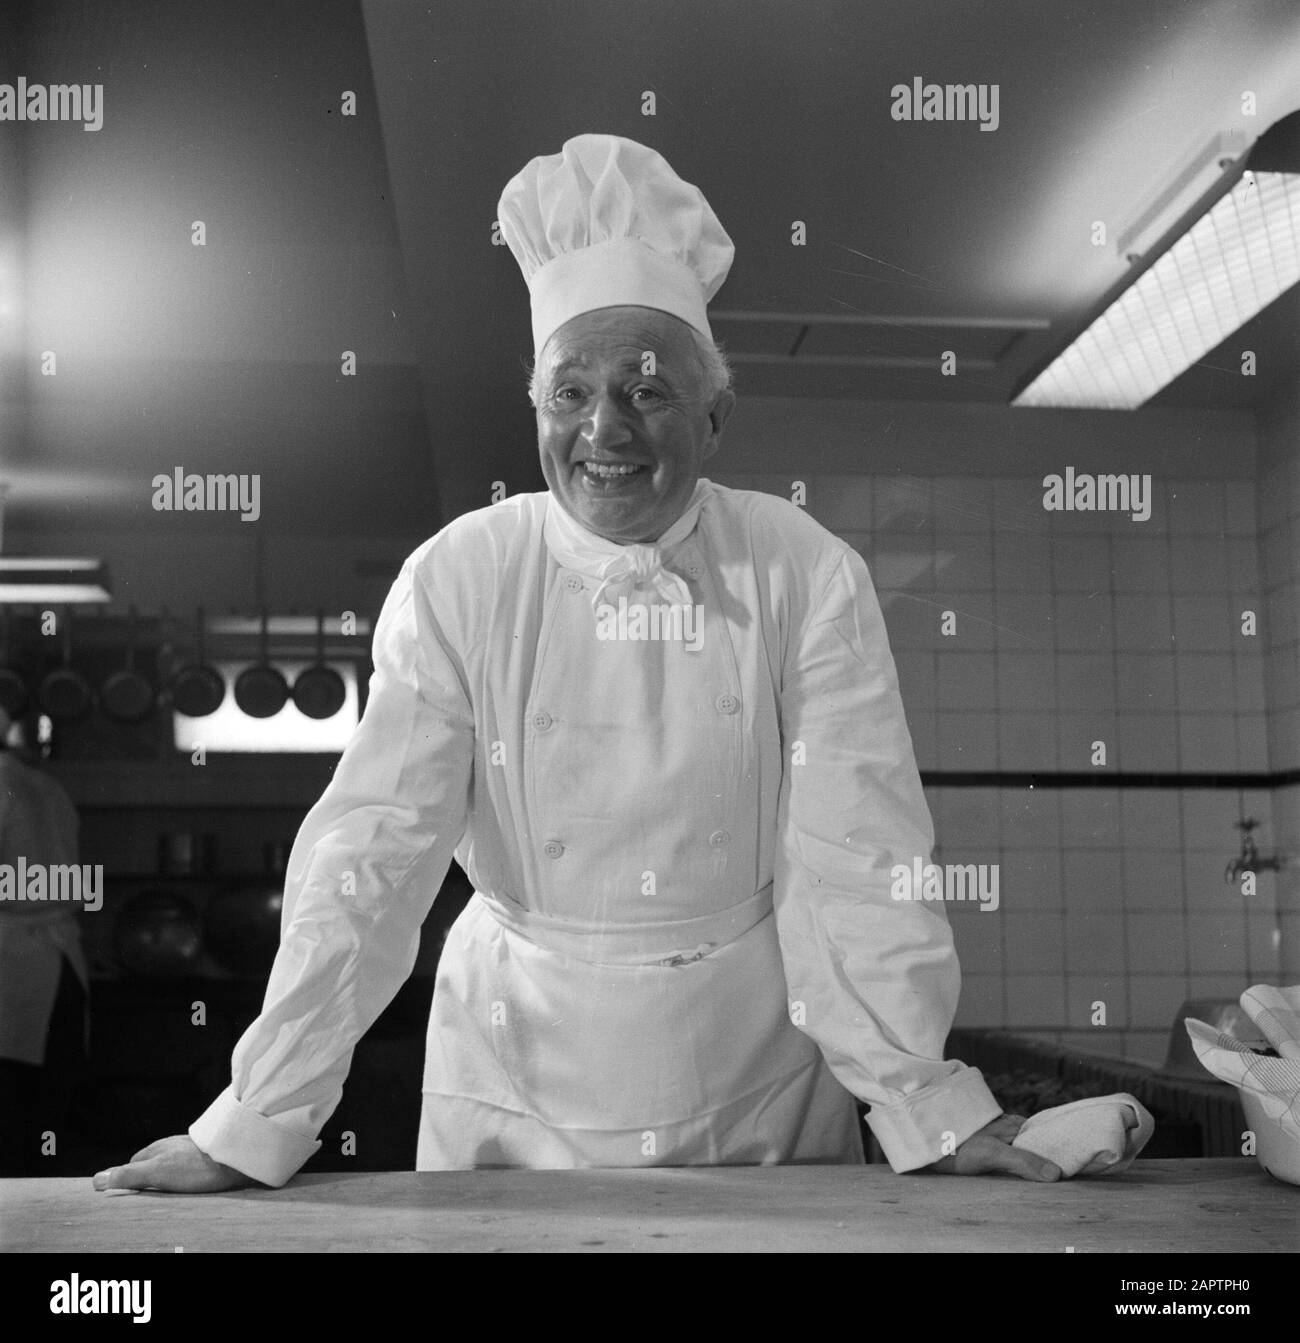 Cook in the kitchen: Rodi Roeters (model) as chef at Amstel Hotel  hotels, kitchens, cooks, food preparation, cooking art, Roeters, Rodi Date: 26 June 1954 Location: Amsterdam, Noord-Holland Keywords: hotels, kitchens, cooks, cooking, food preparation Personal name: Roeters, Rodi Institution name: Amstel Hotel Stock Photo